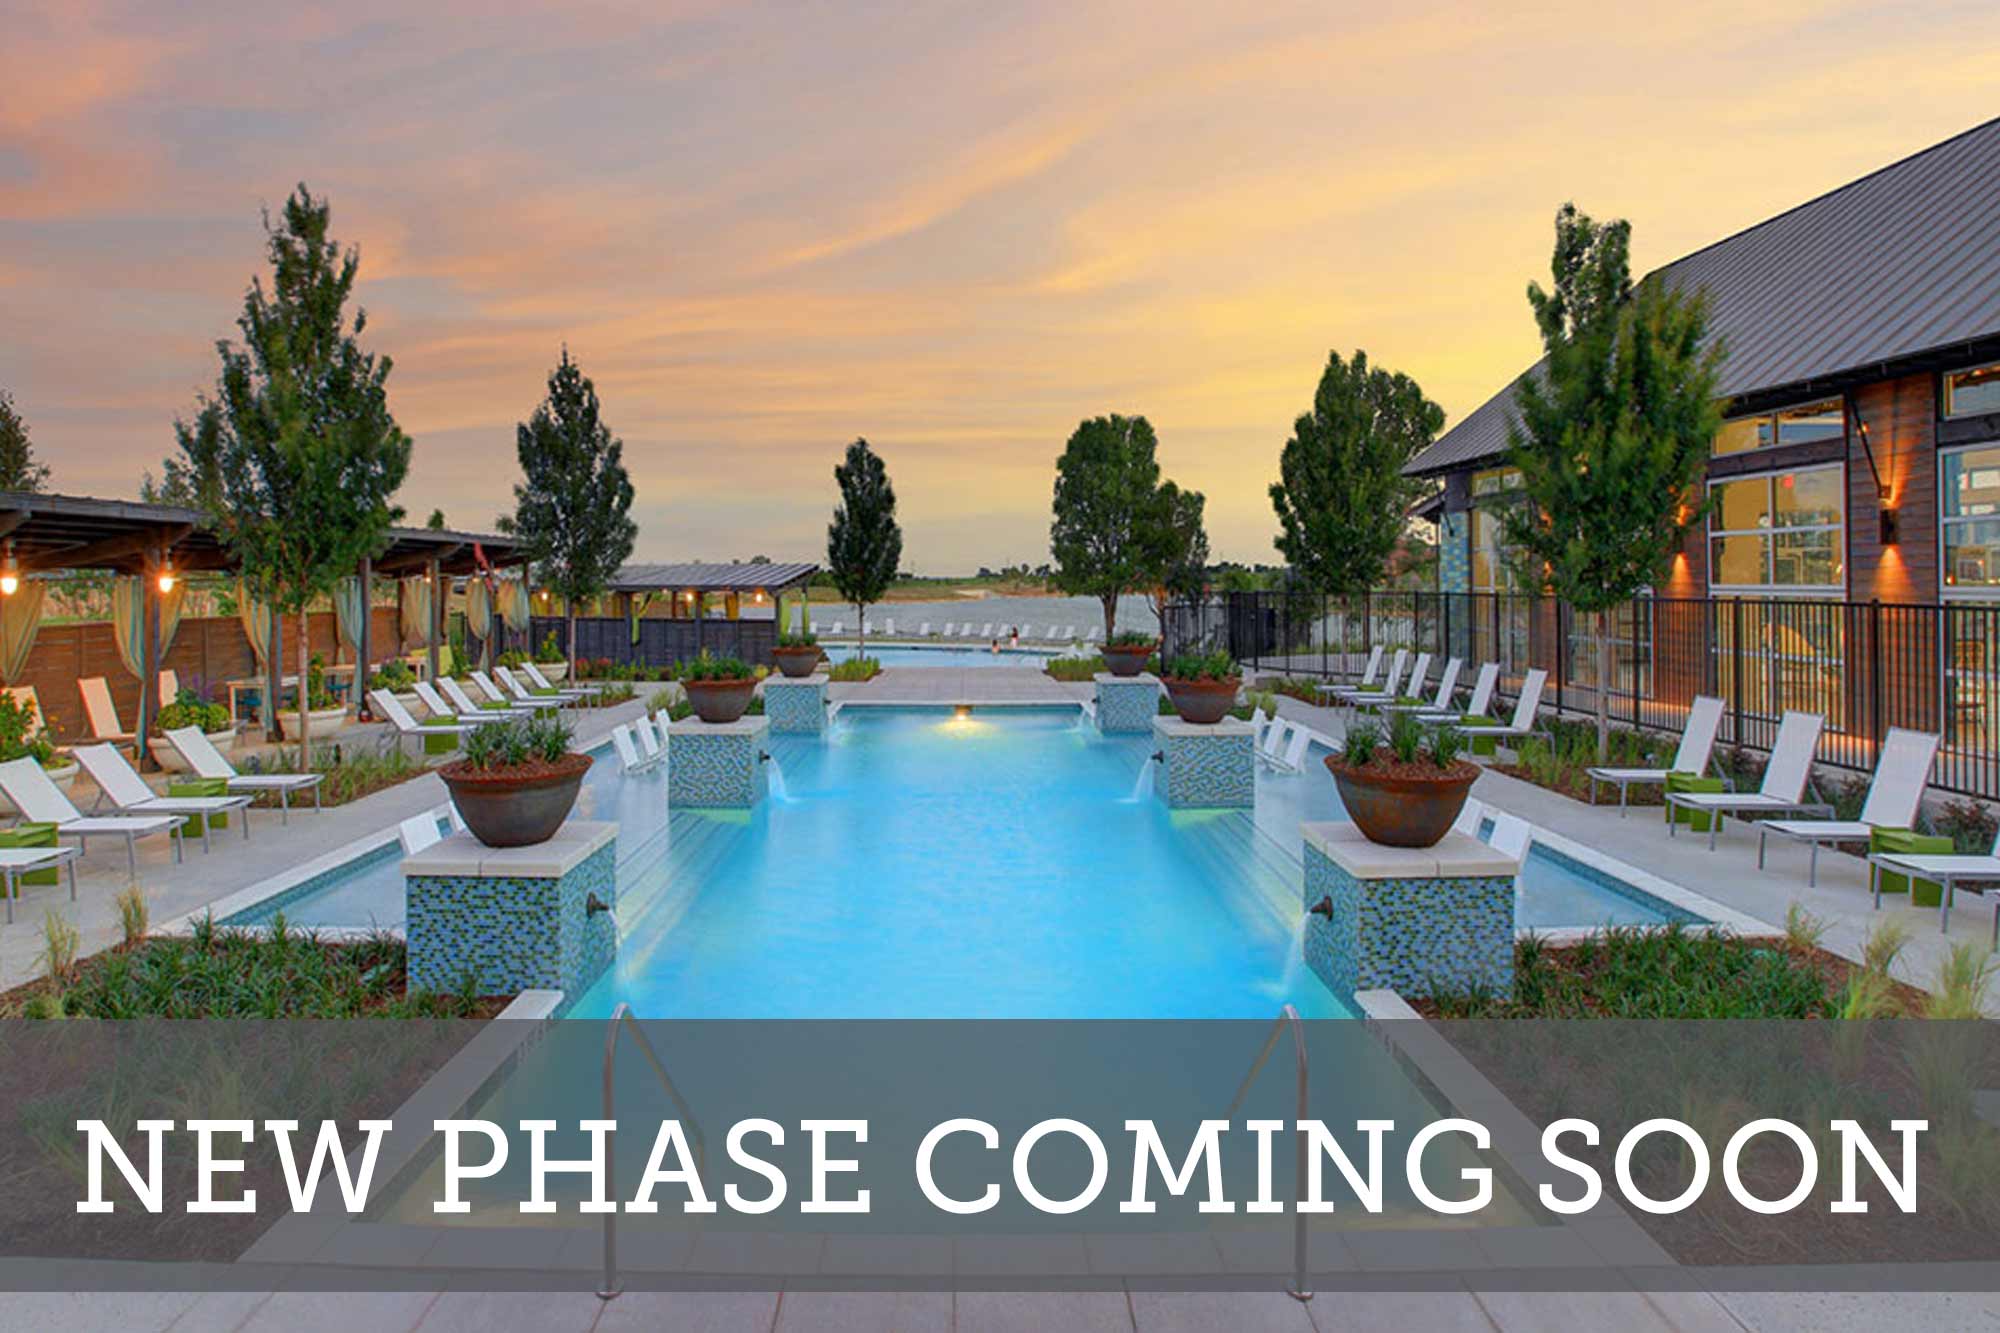 Harvest Orchard Classic - New Phase Coming Soon